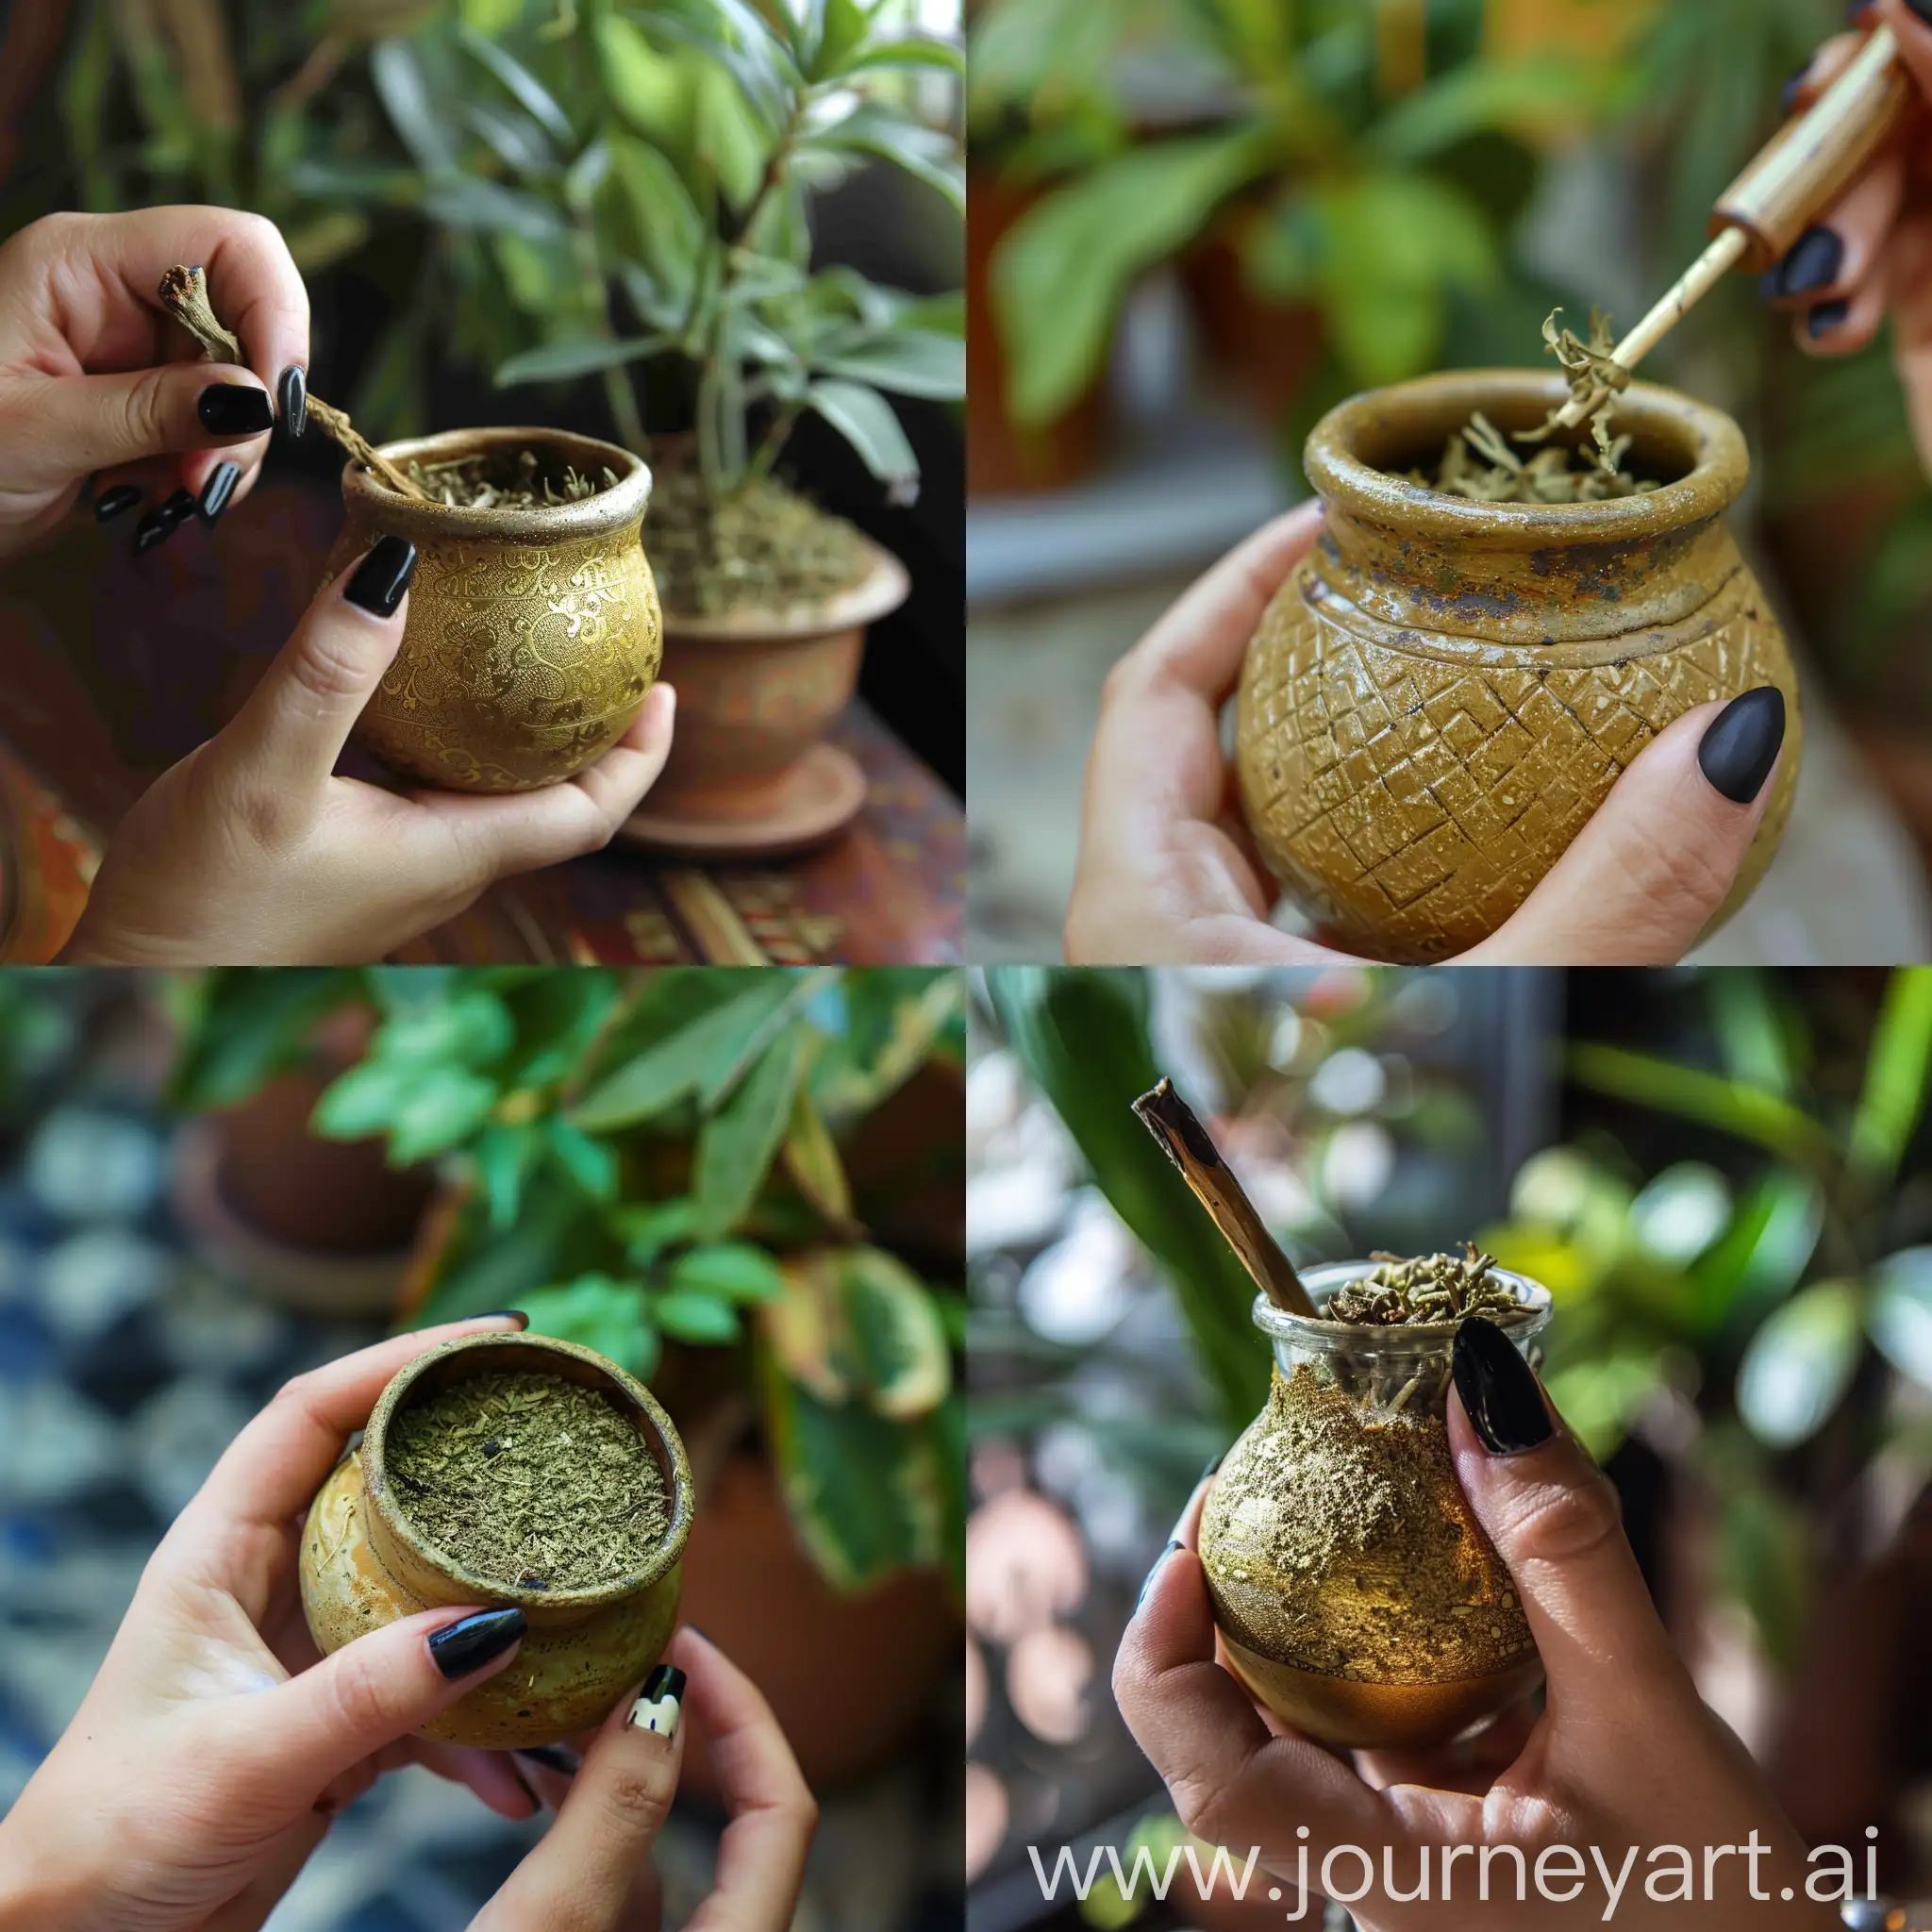 Female-Hand-Holding-Chimarro-with-Yerba-Mate-Plants-in-Background